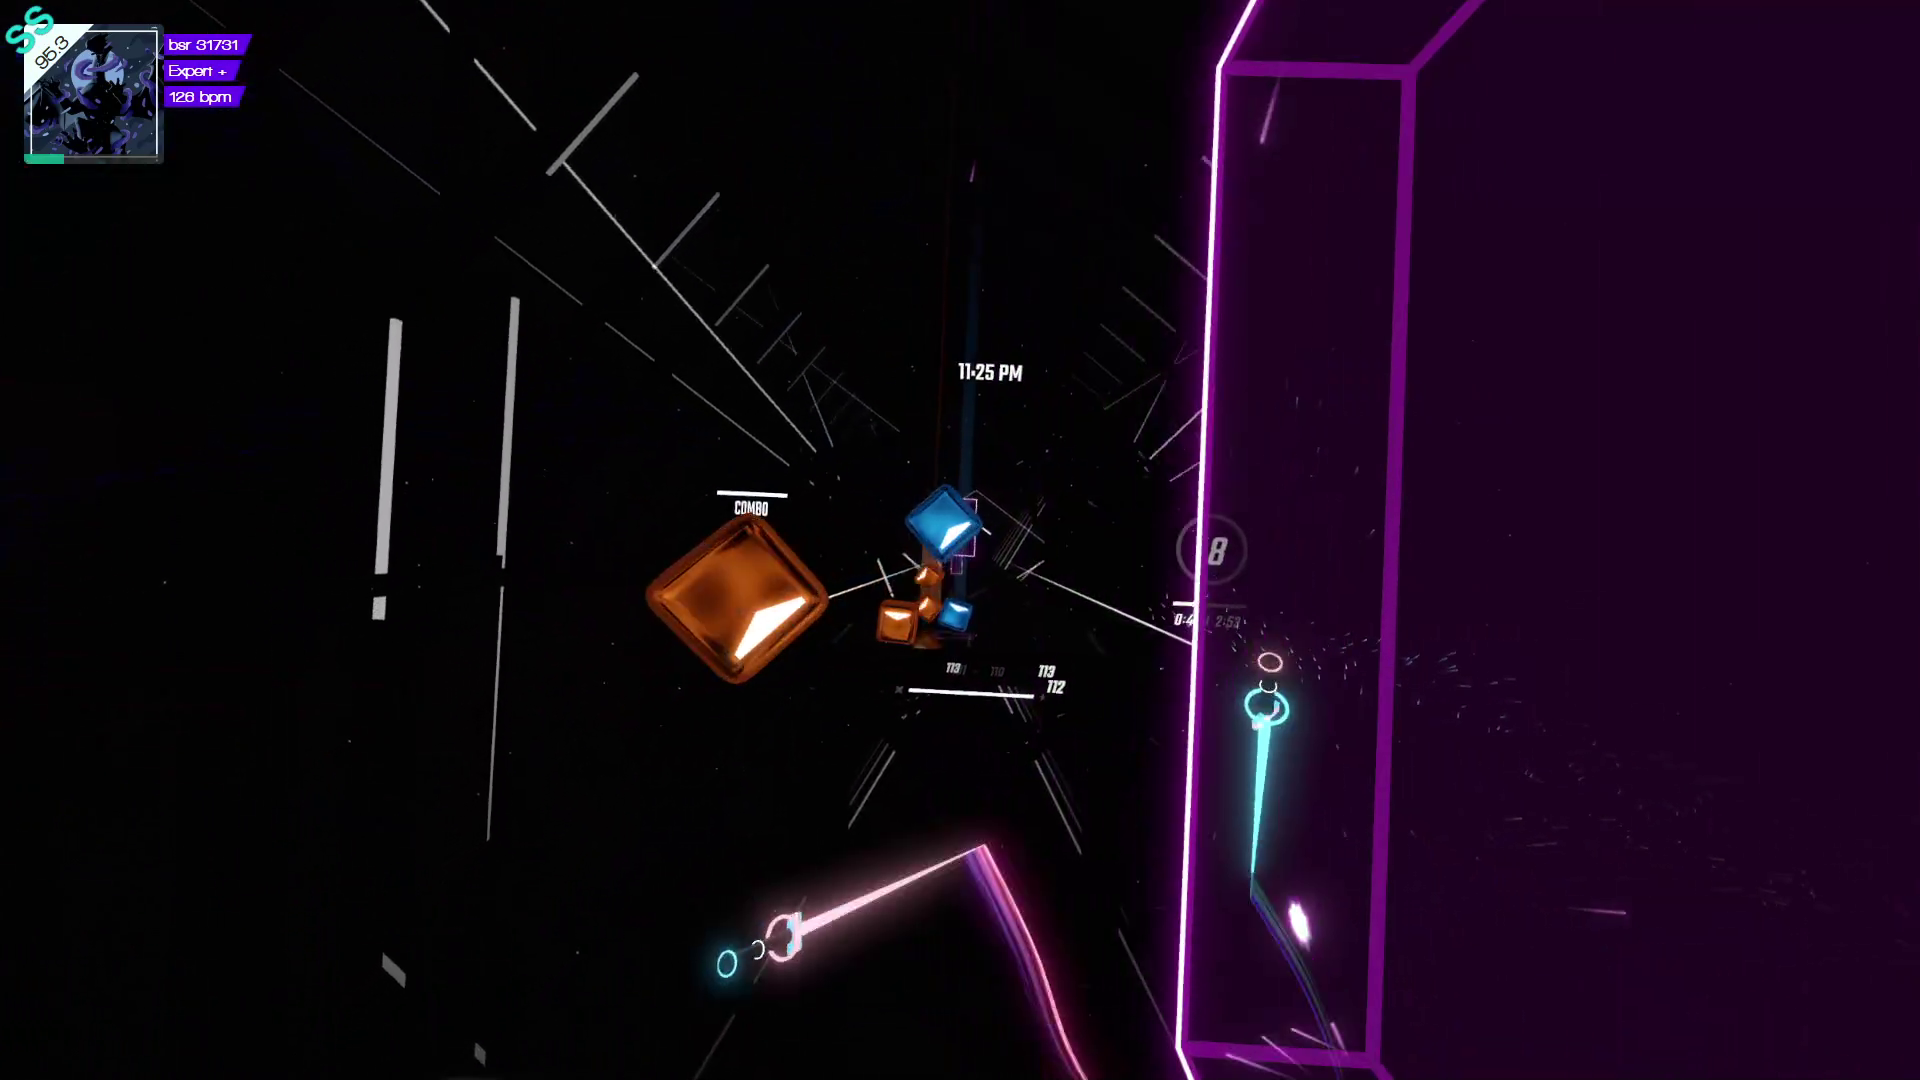 Beat Saber with the custom orange and blue colors